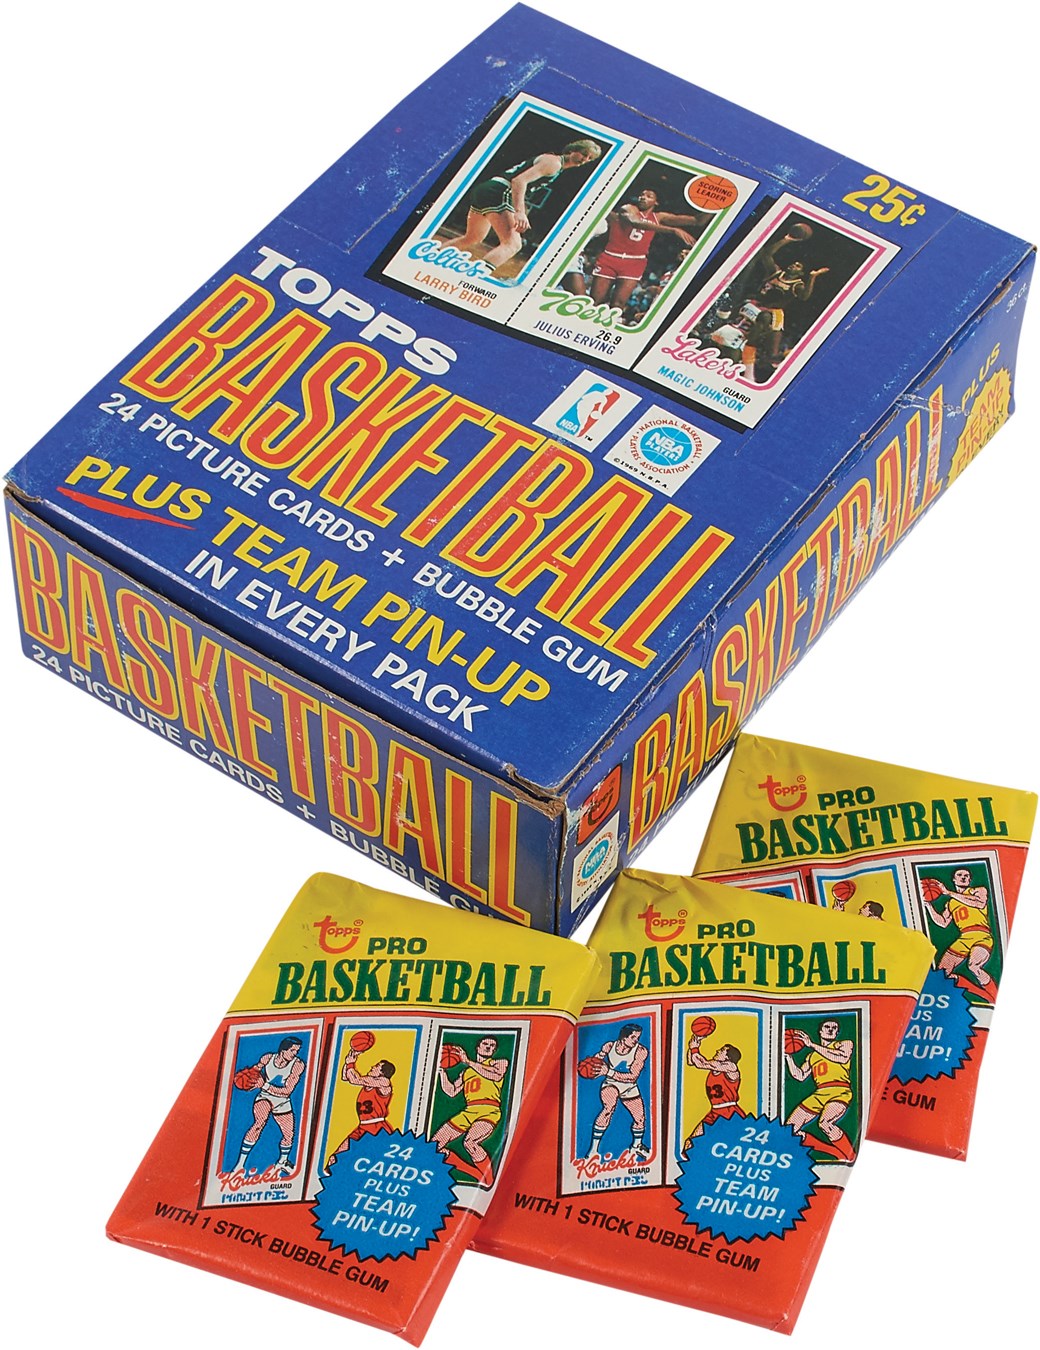 1980-81 Topps Basketball Wax Box with 36 Unopened Packs